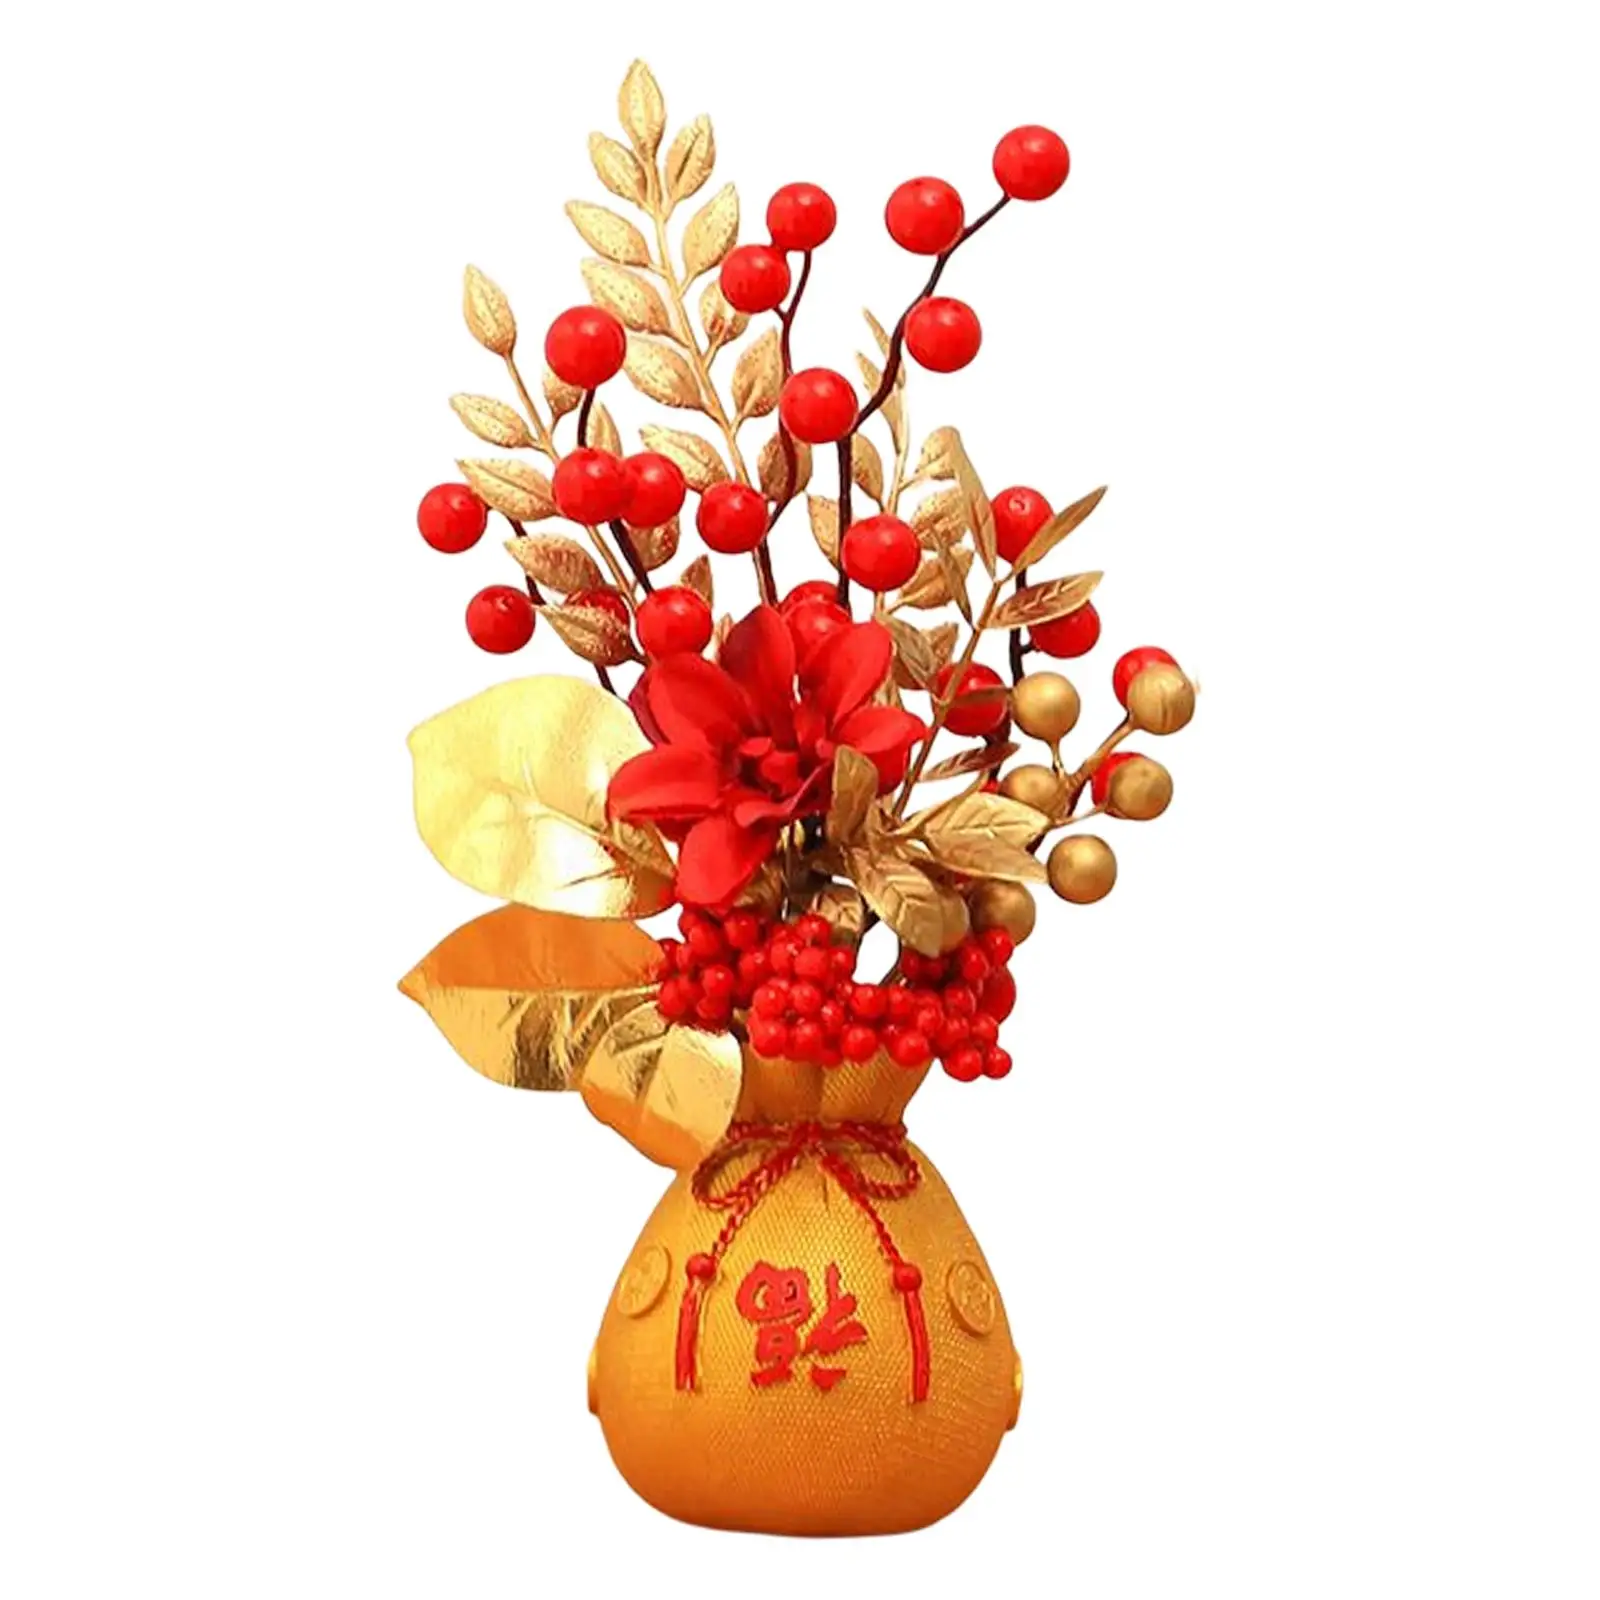 Chinese Style Artificial Potted Flower Ornament Decoration Harvest Fall Flower Basket for Indoor Farmhouse Hotel Party Office